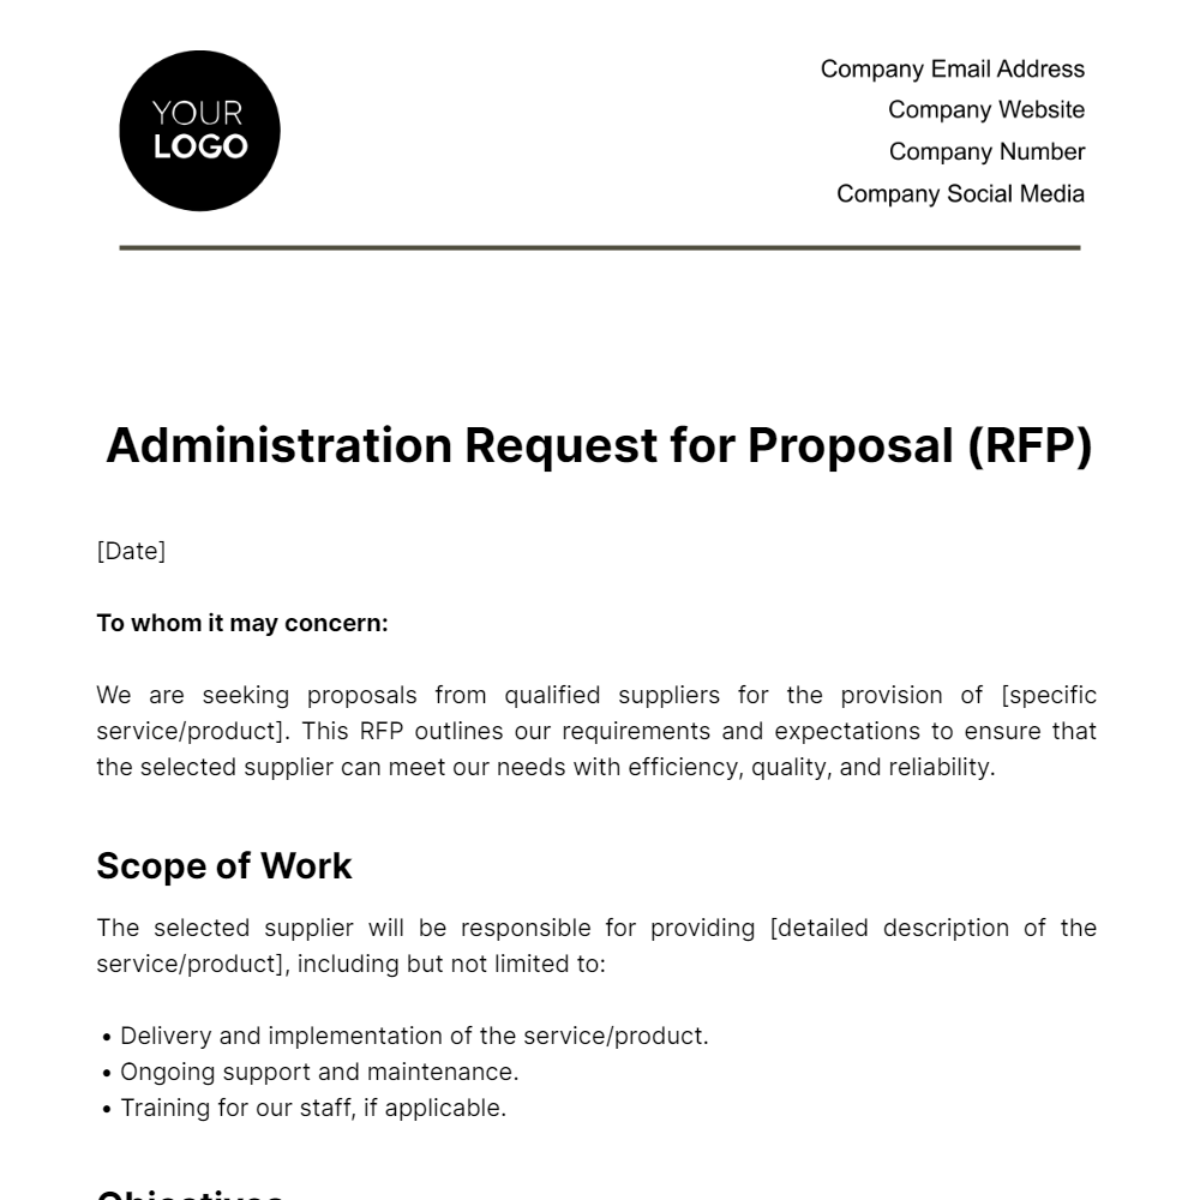 Administration Request for Proposal (RFP) Template